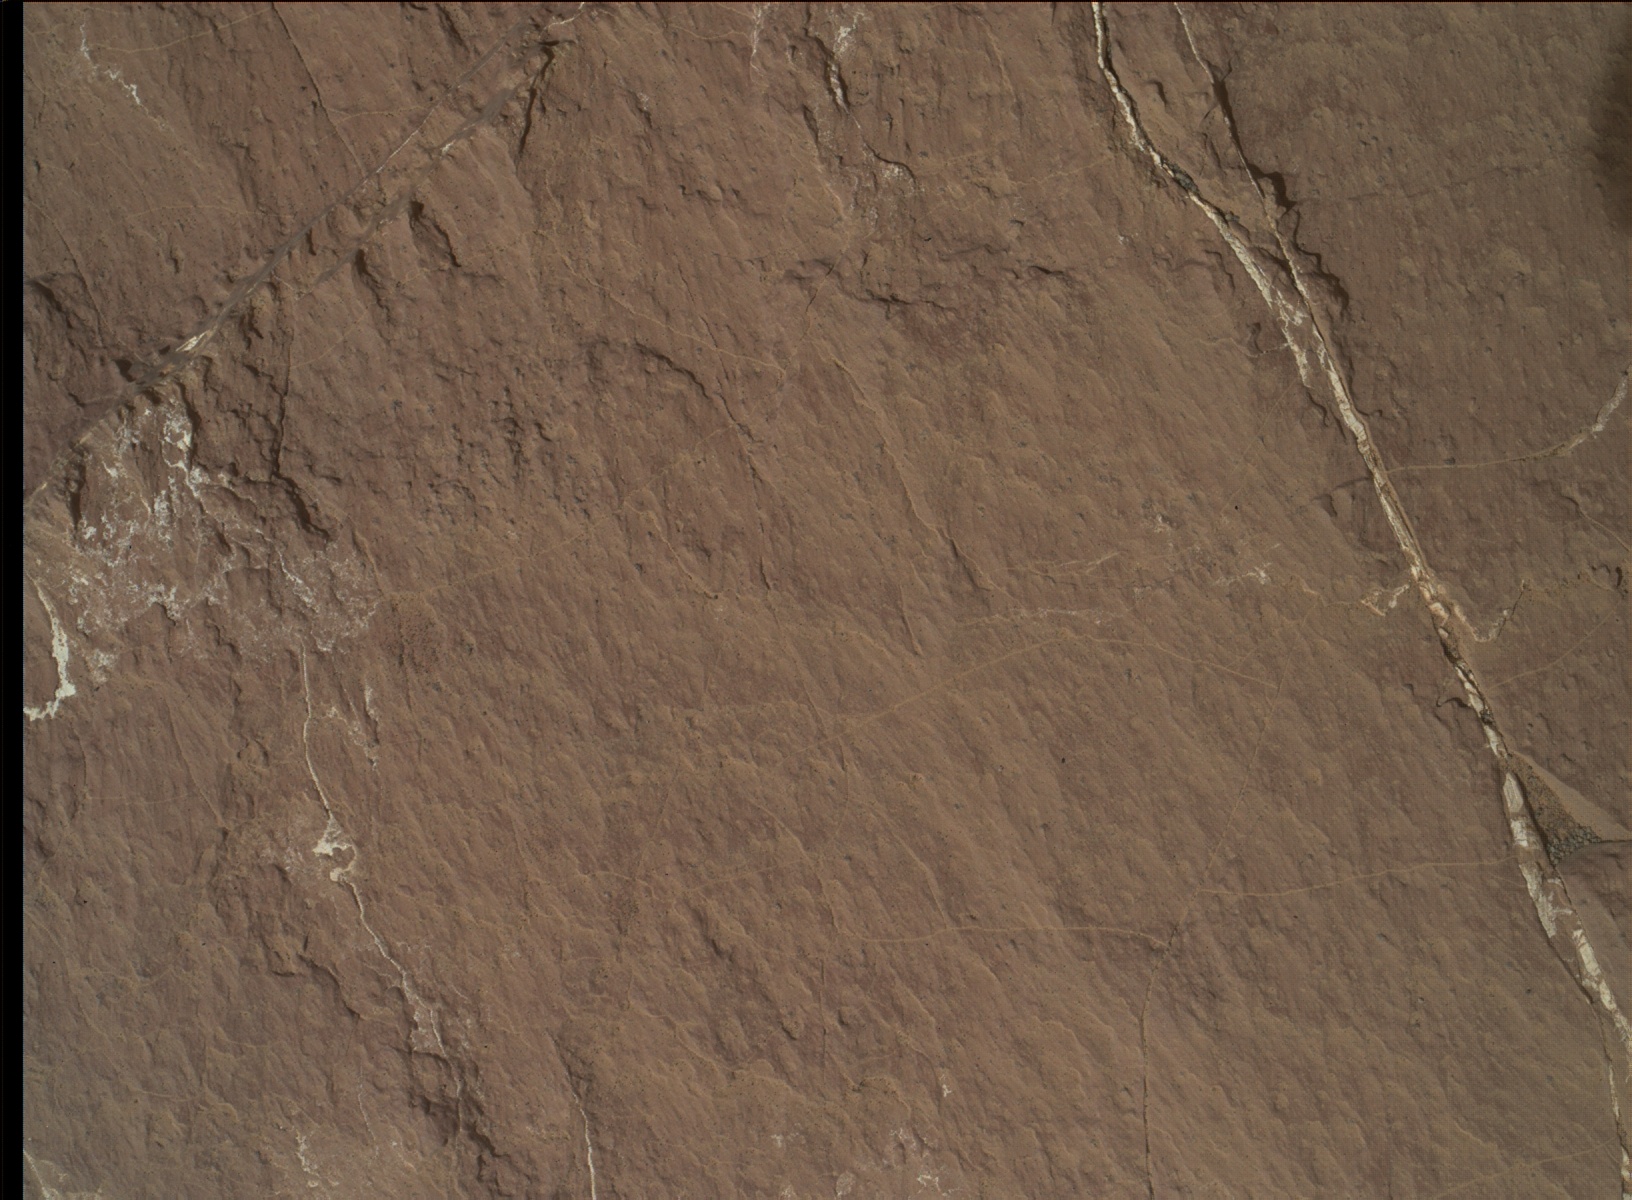 Nasa's Mars rover Curiosity acquired this image using its Mars Hand Lens Imager (MAHLI) on Sol 1572